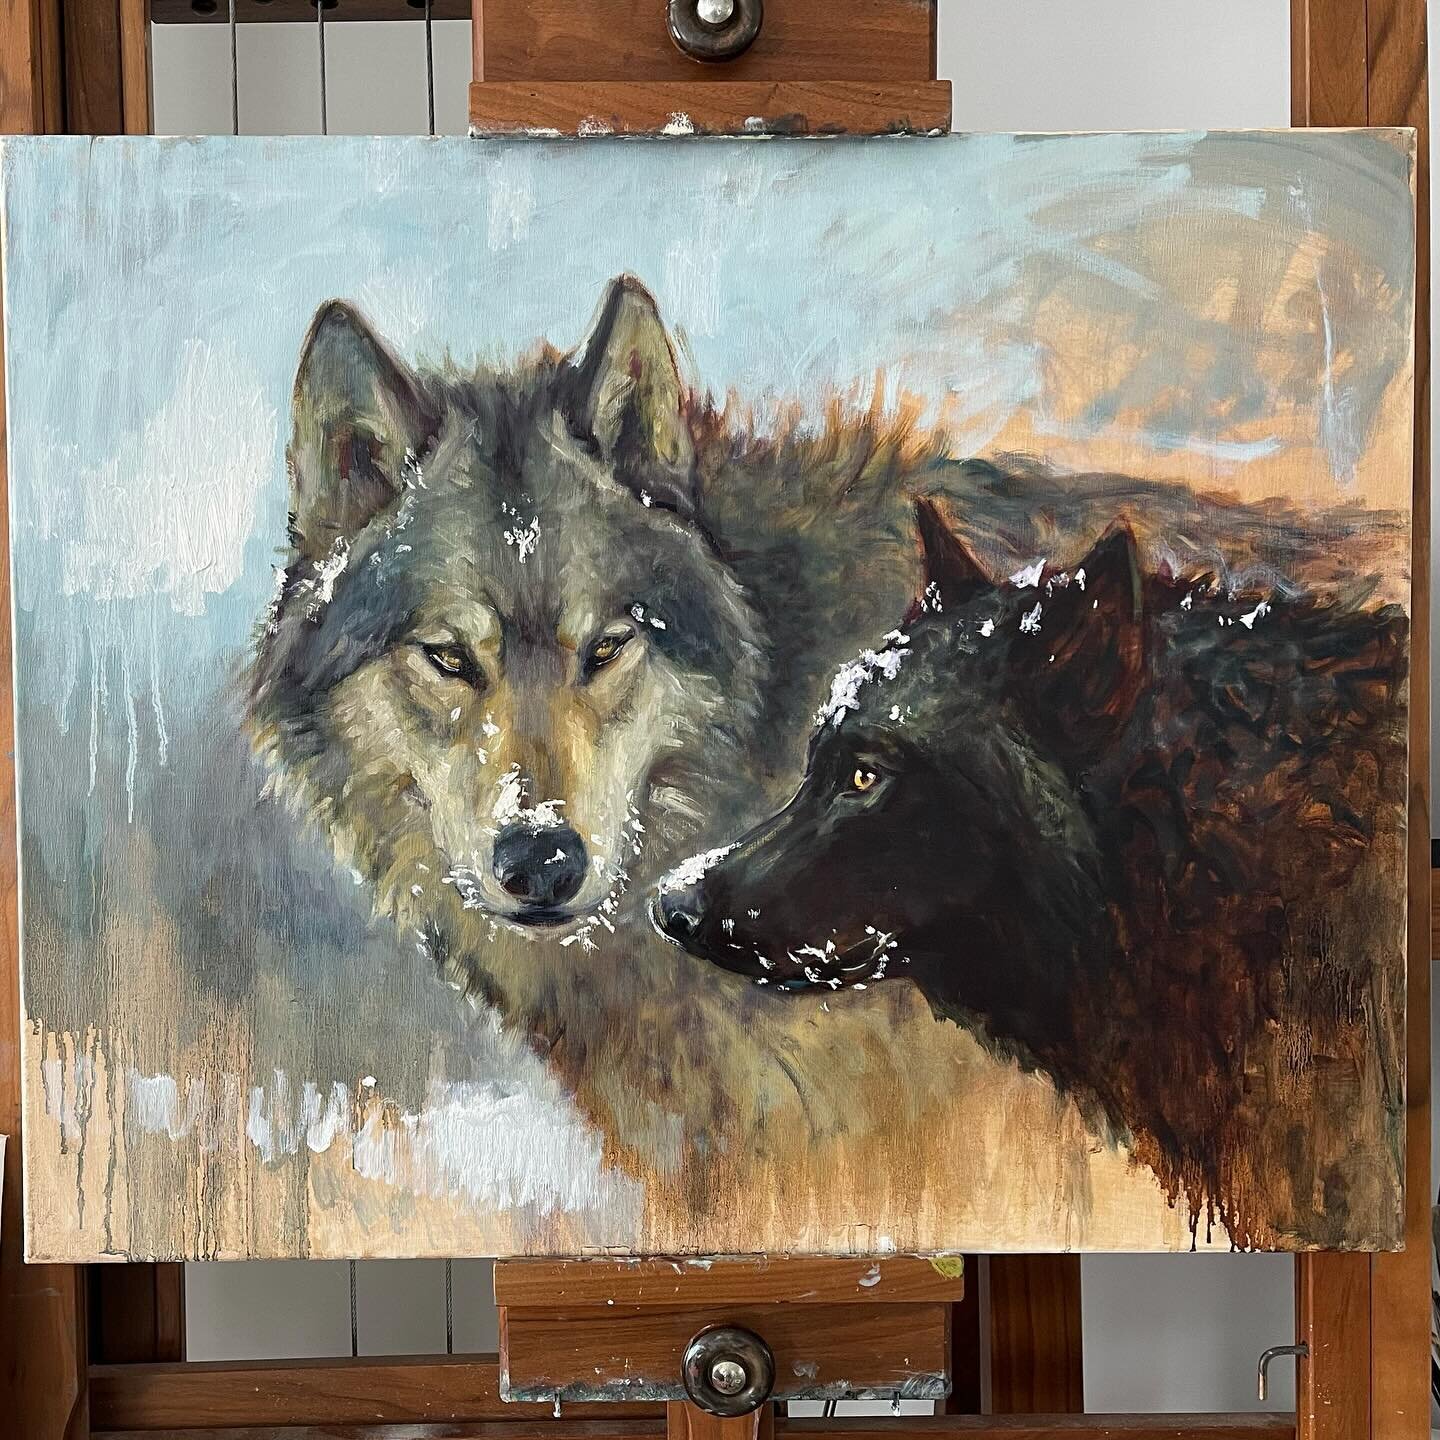 It&rsquo;s dumping snow today so I felt inspired  to add some in this painting&hellip; I bet these two will enjoy it 🤩🐺😇
Work in progress&hellip; 24x30

#create #wolves #artisthavingfun #love #snow #north #oilpainting #wild #wildlifeart #inspirati